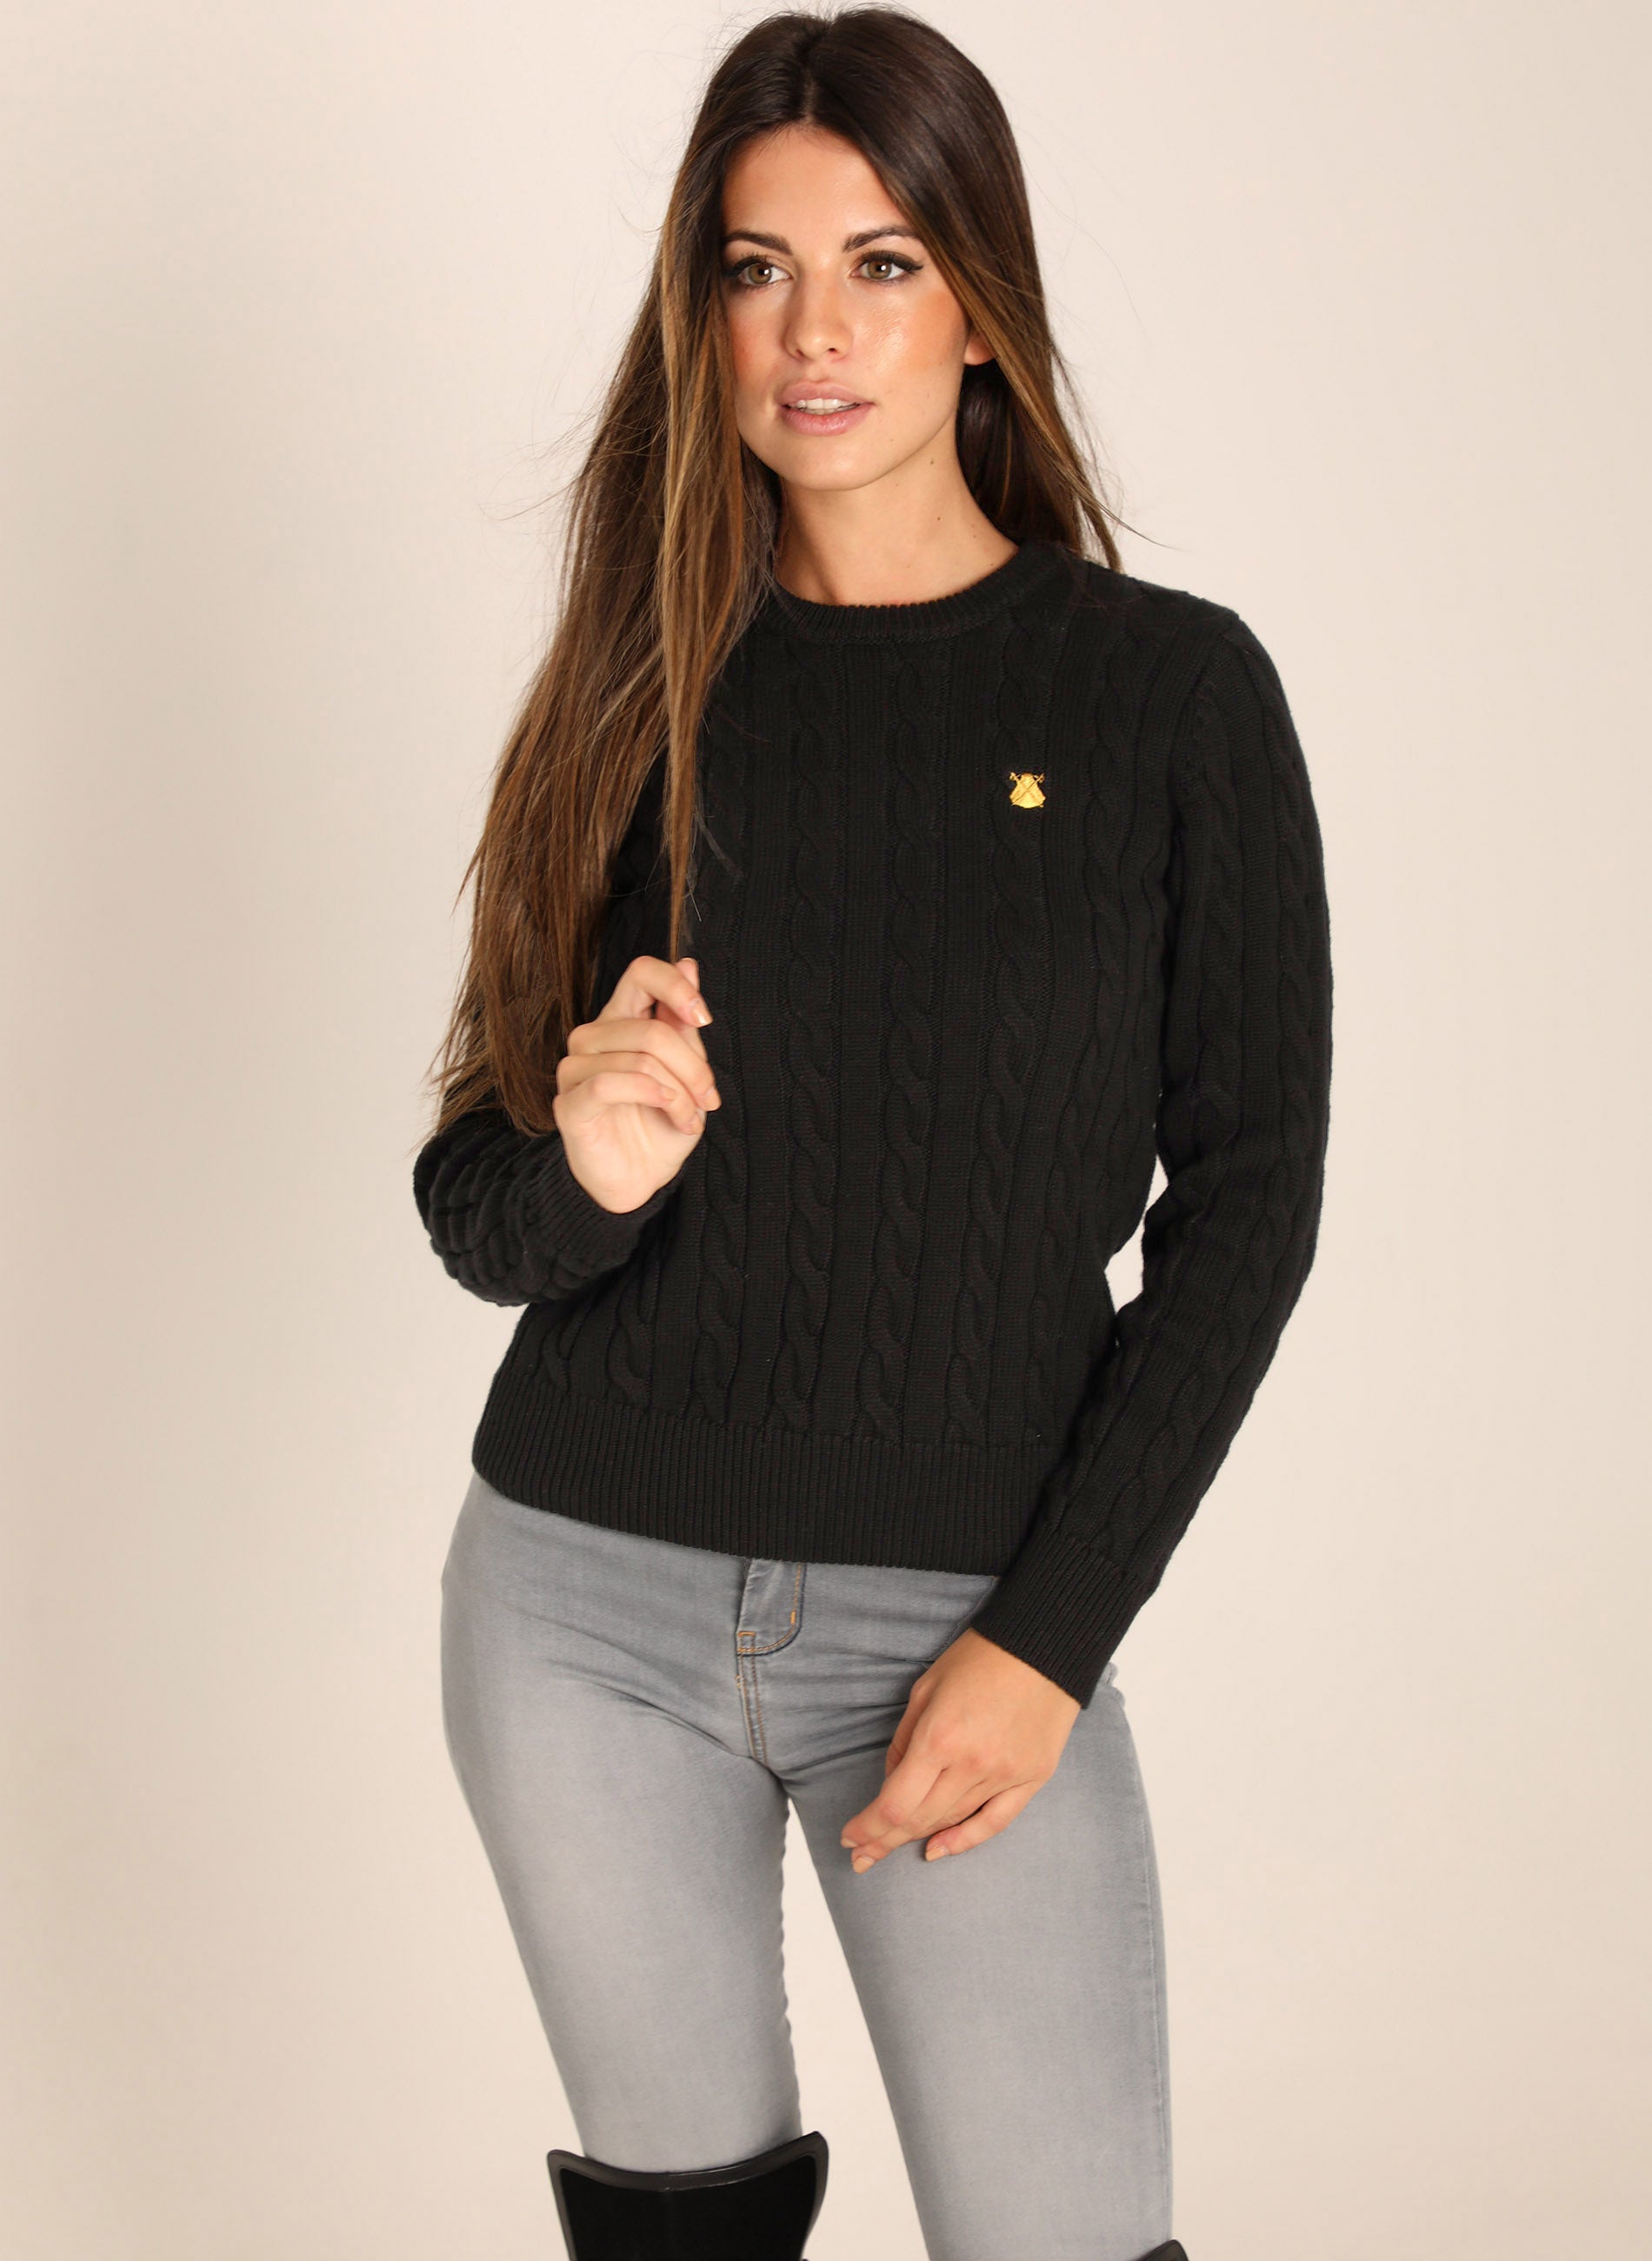 Women's Black Cable Knit Sweater